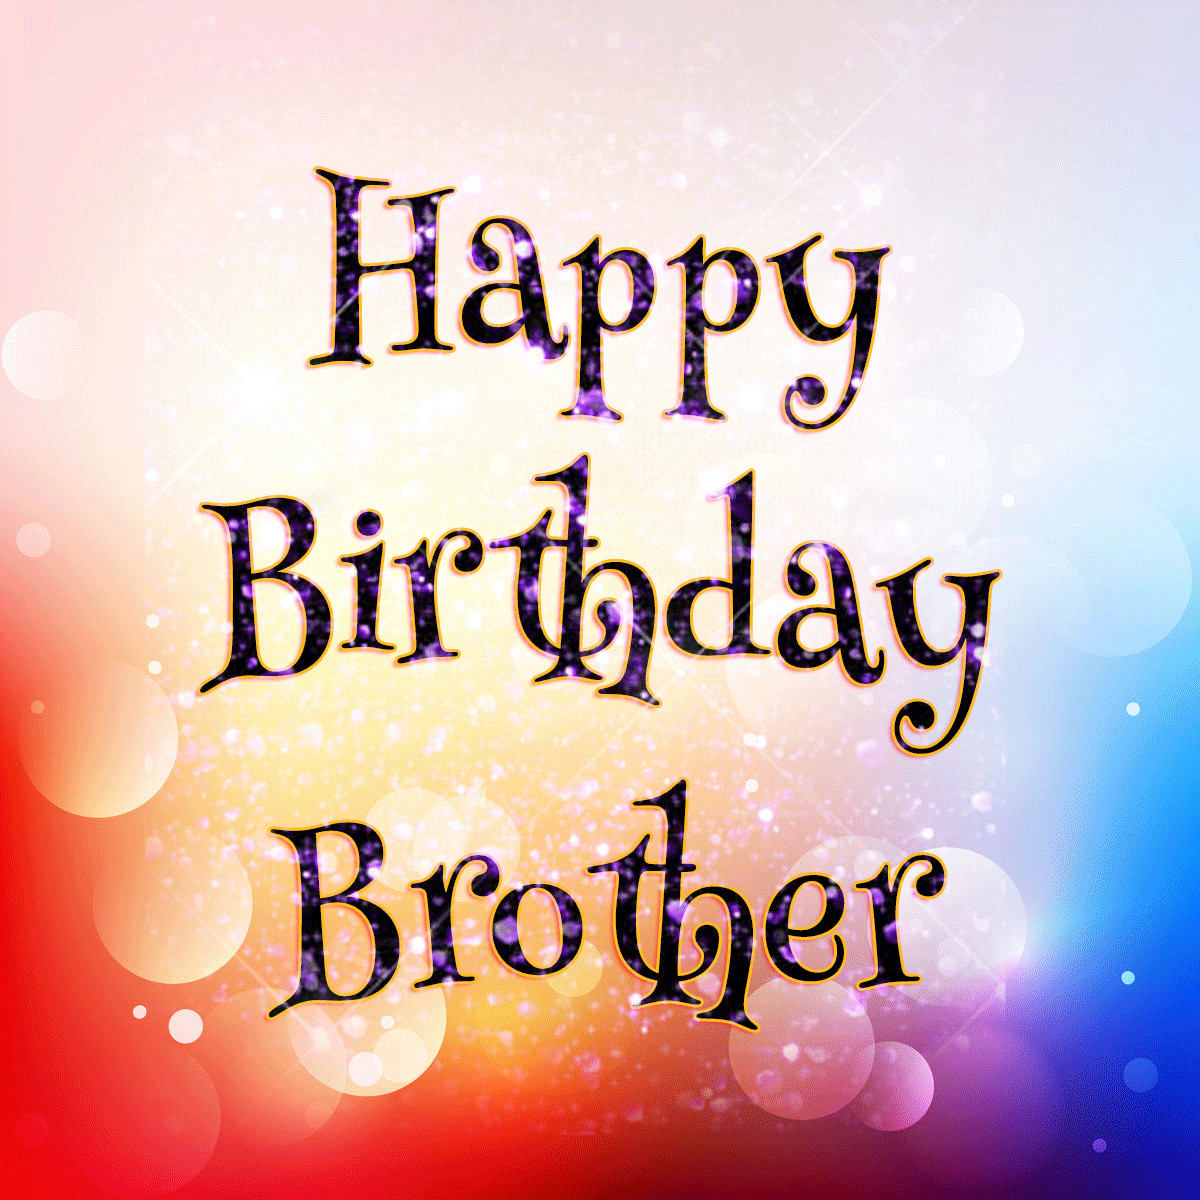 Happy Birthday Brother Wishes
 Birthday Wishes For Brother Page 3